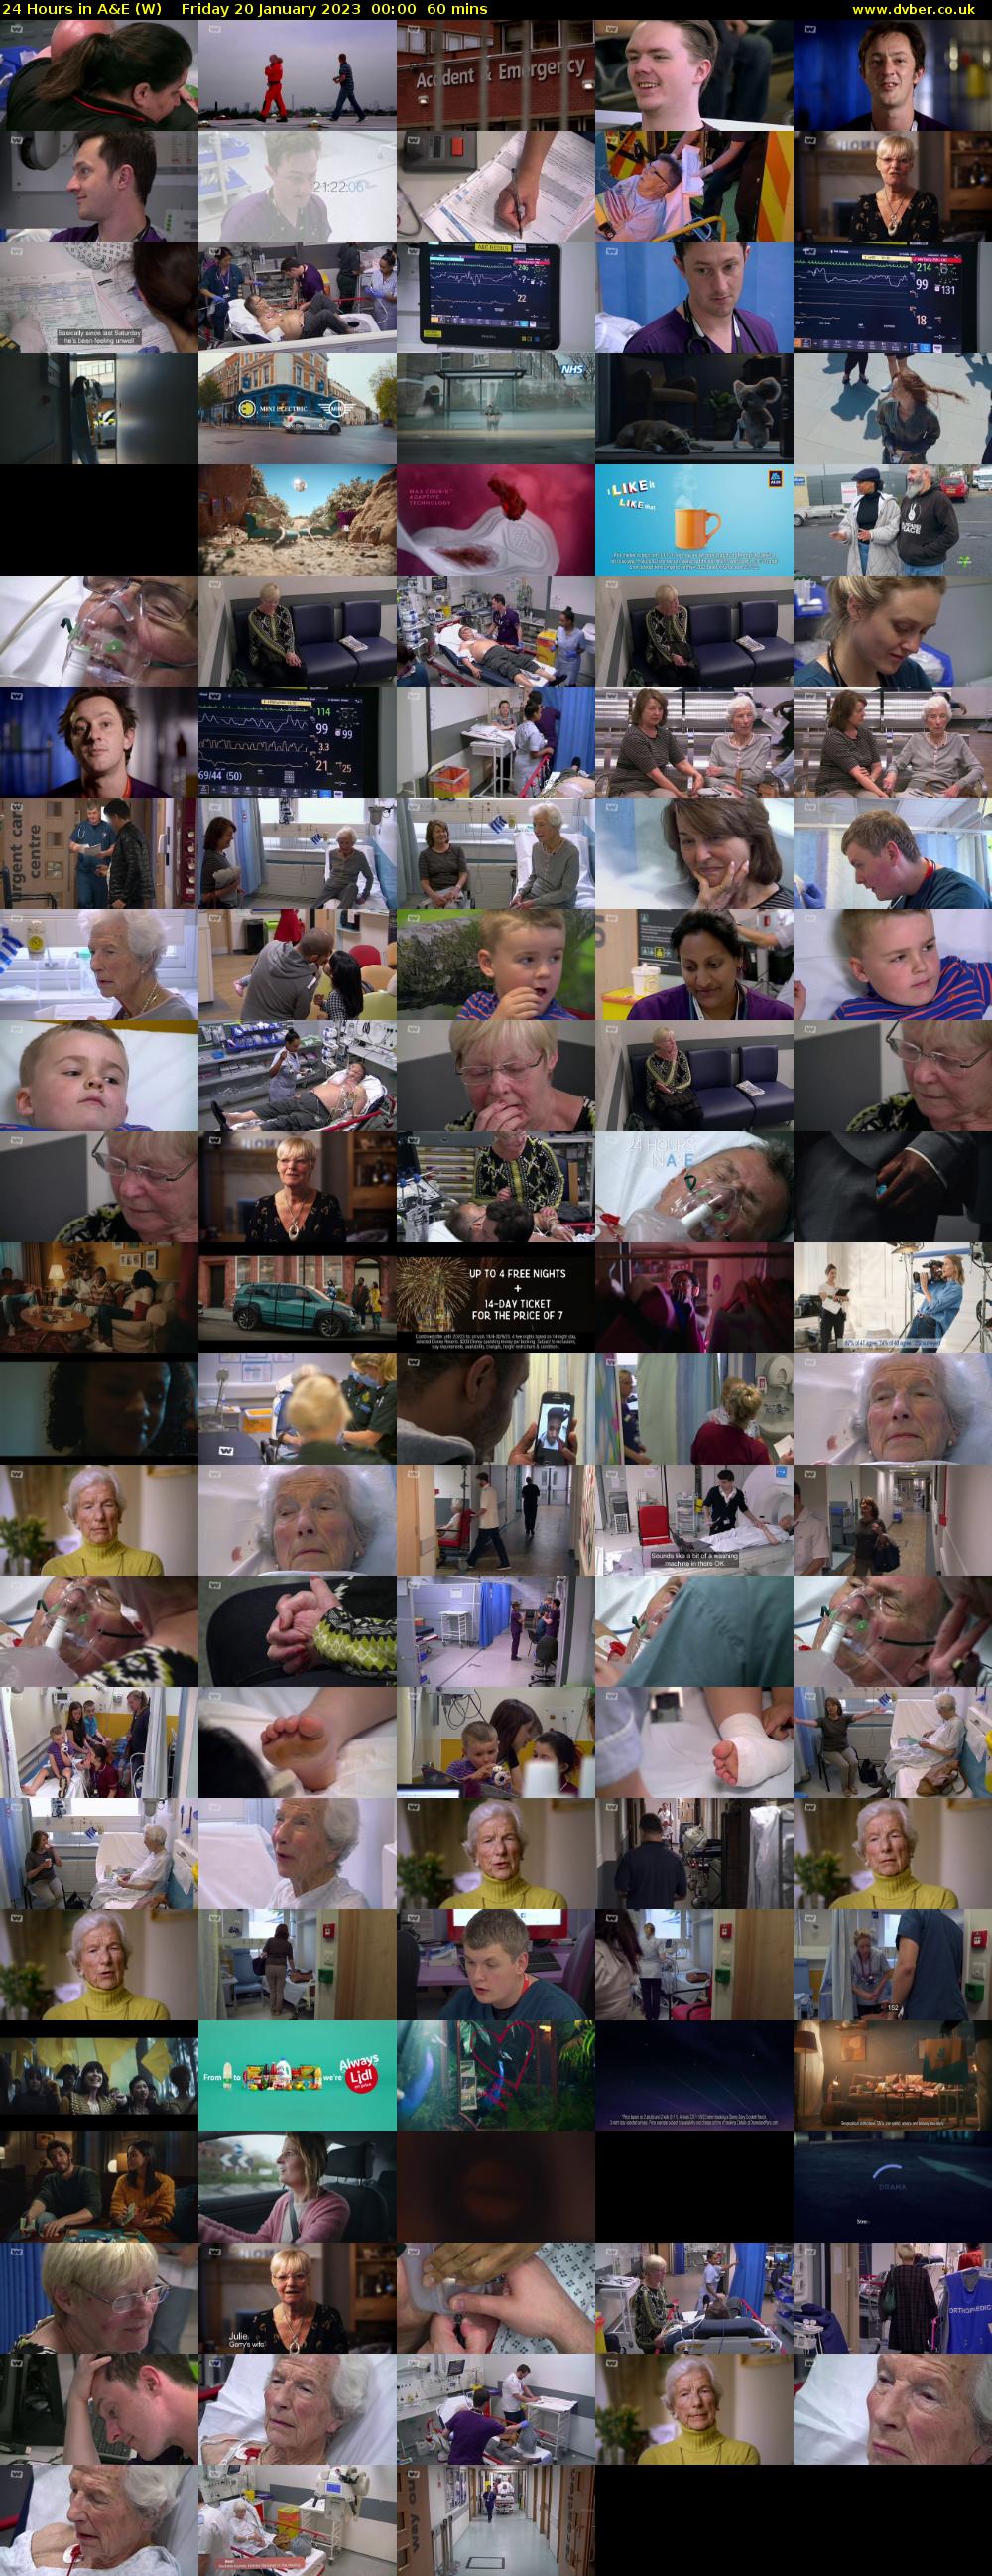 24 Hours in A&E (W) Friday 20 January 2023 00:00 - 01:00